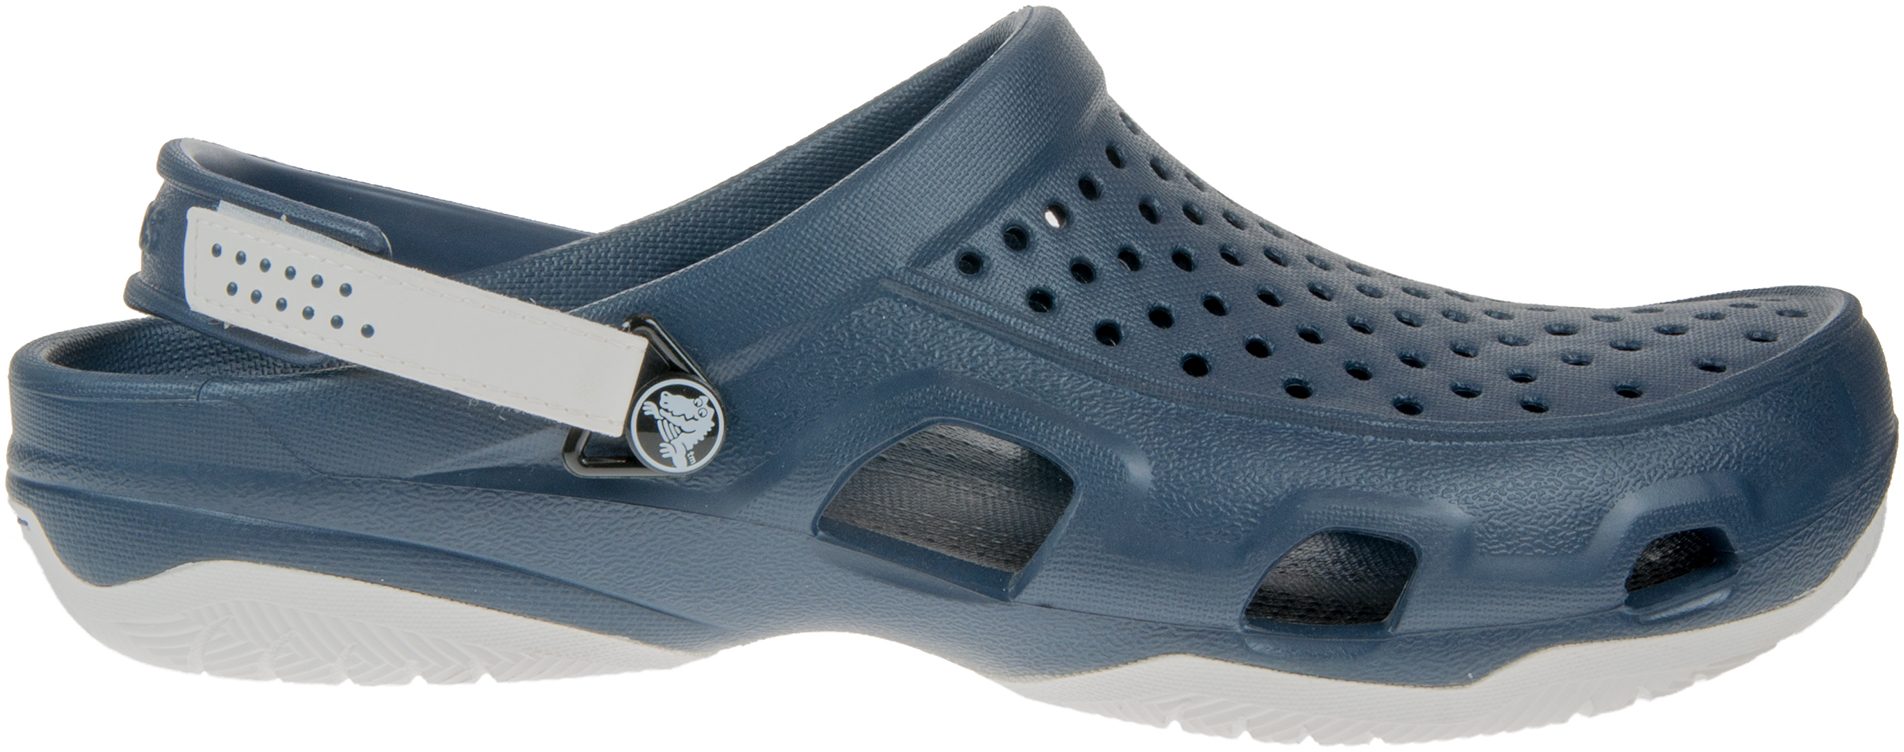 Crocs Mens Swiftwater Deck Clog Navy / White 203981-462 - Outdoor ...